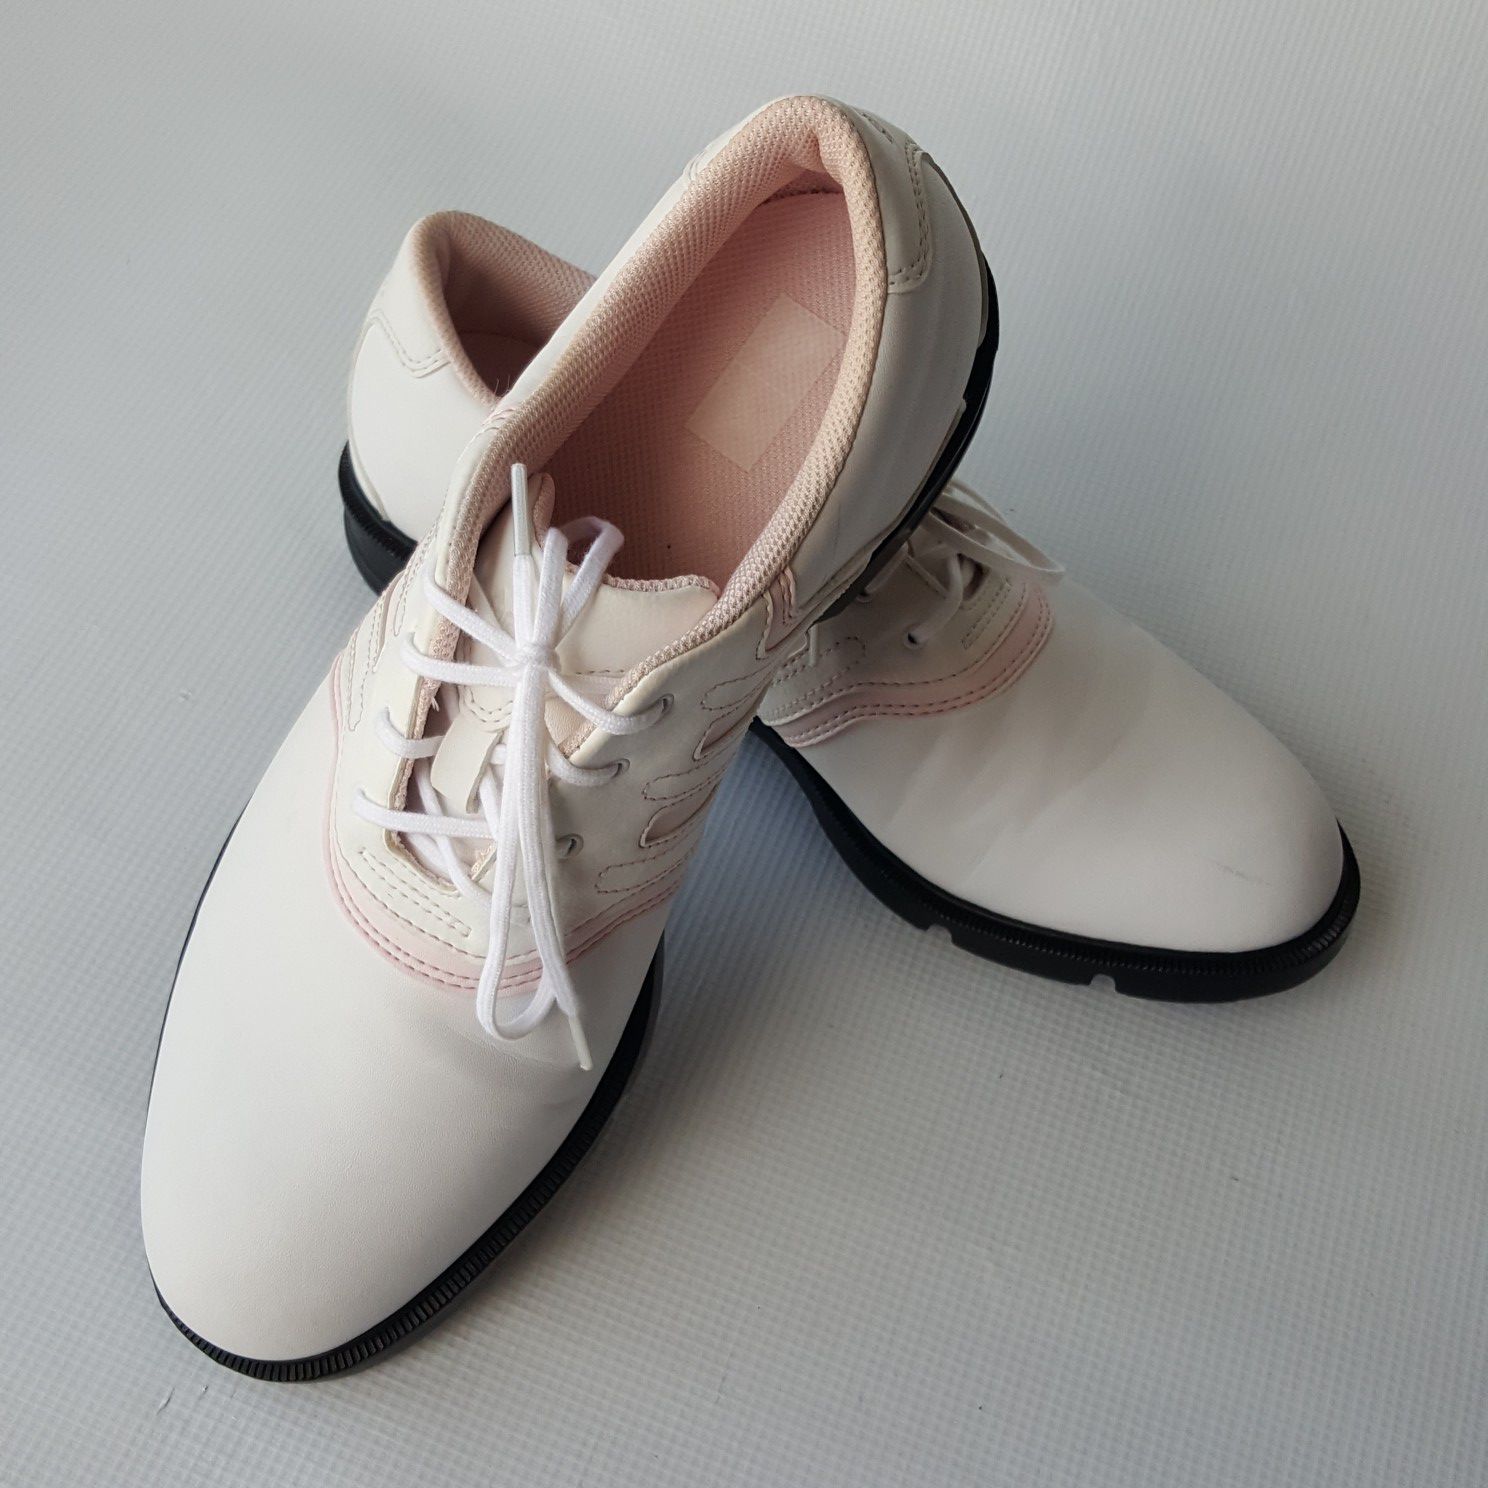 Women's Adidas Z- Traxion White/Pink Oxford Golf Shoes Size 9.5 for Sale Las Vegas, NV - OfferUp